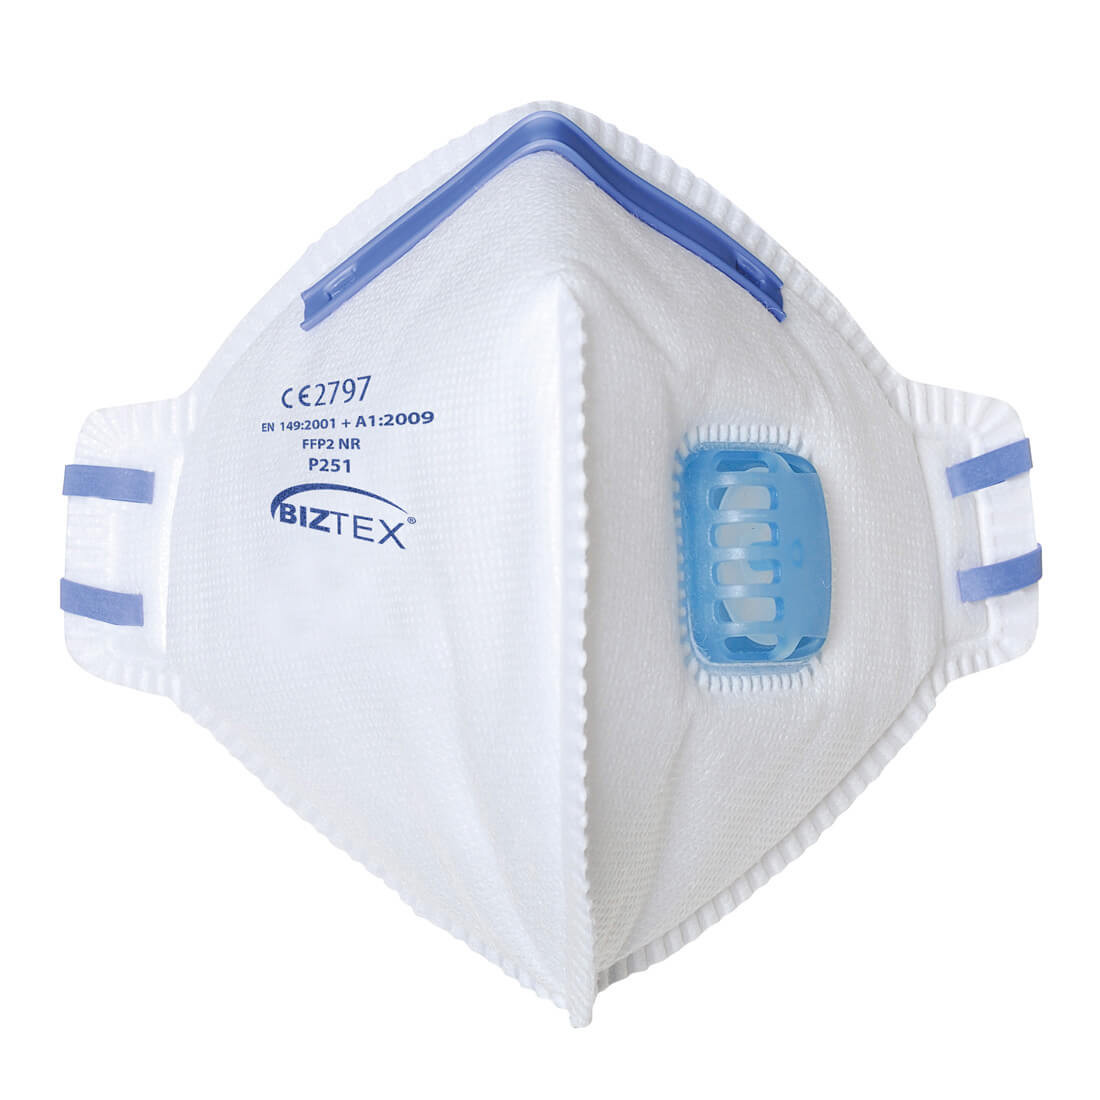 FFP2 Valved Dust Mist Fold Flat Respirator - Personal protection